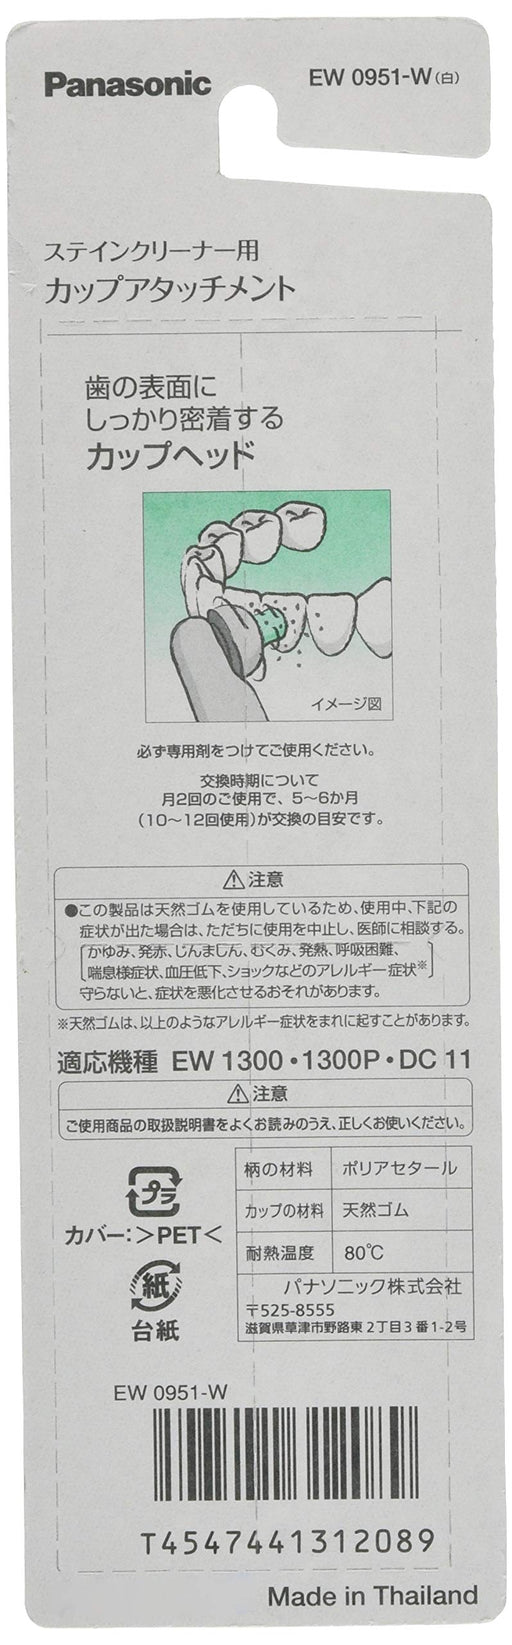 Panasonic Stain Cleaner Replacement Cup EW0951-W 2 Piece for electric toothbrush_2